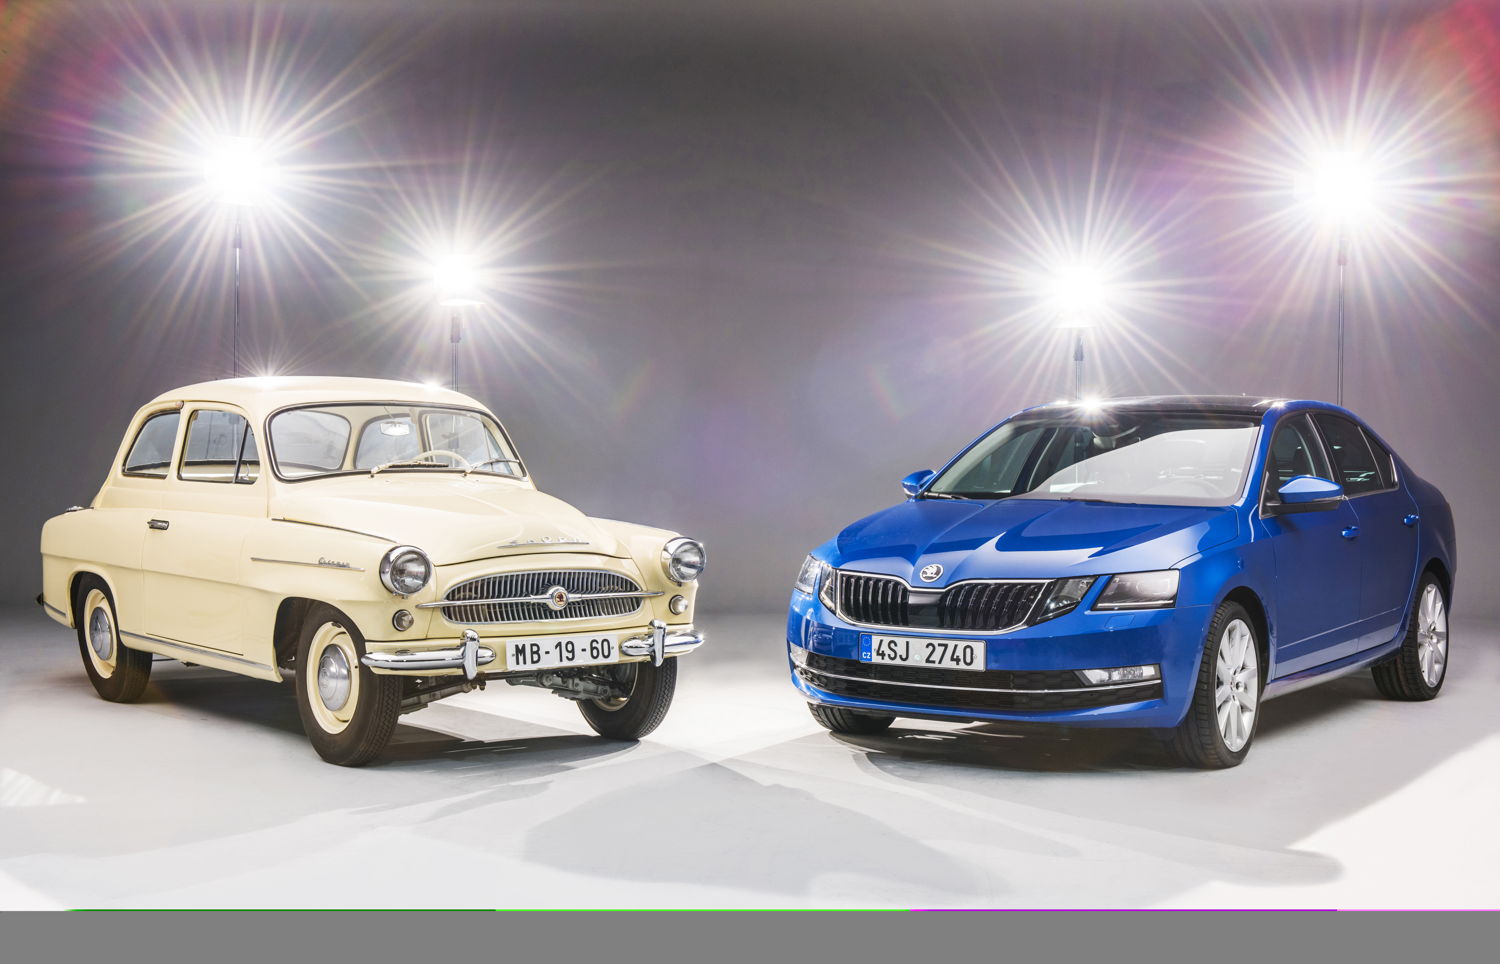 To date, nearly 6.5 million customers have opted for a ŠKODA OCTAVIA. Side-by-side in the picture, a first-generation OCTAVIA from 1959 and the current model.